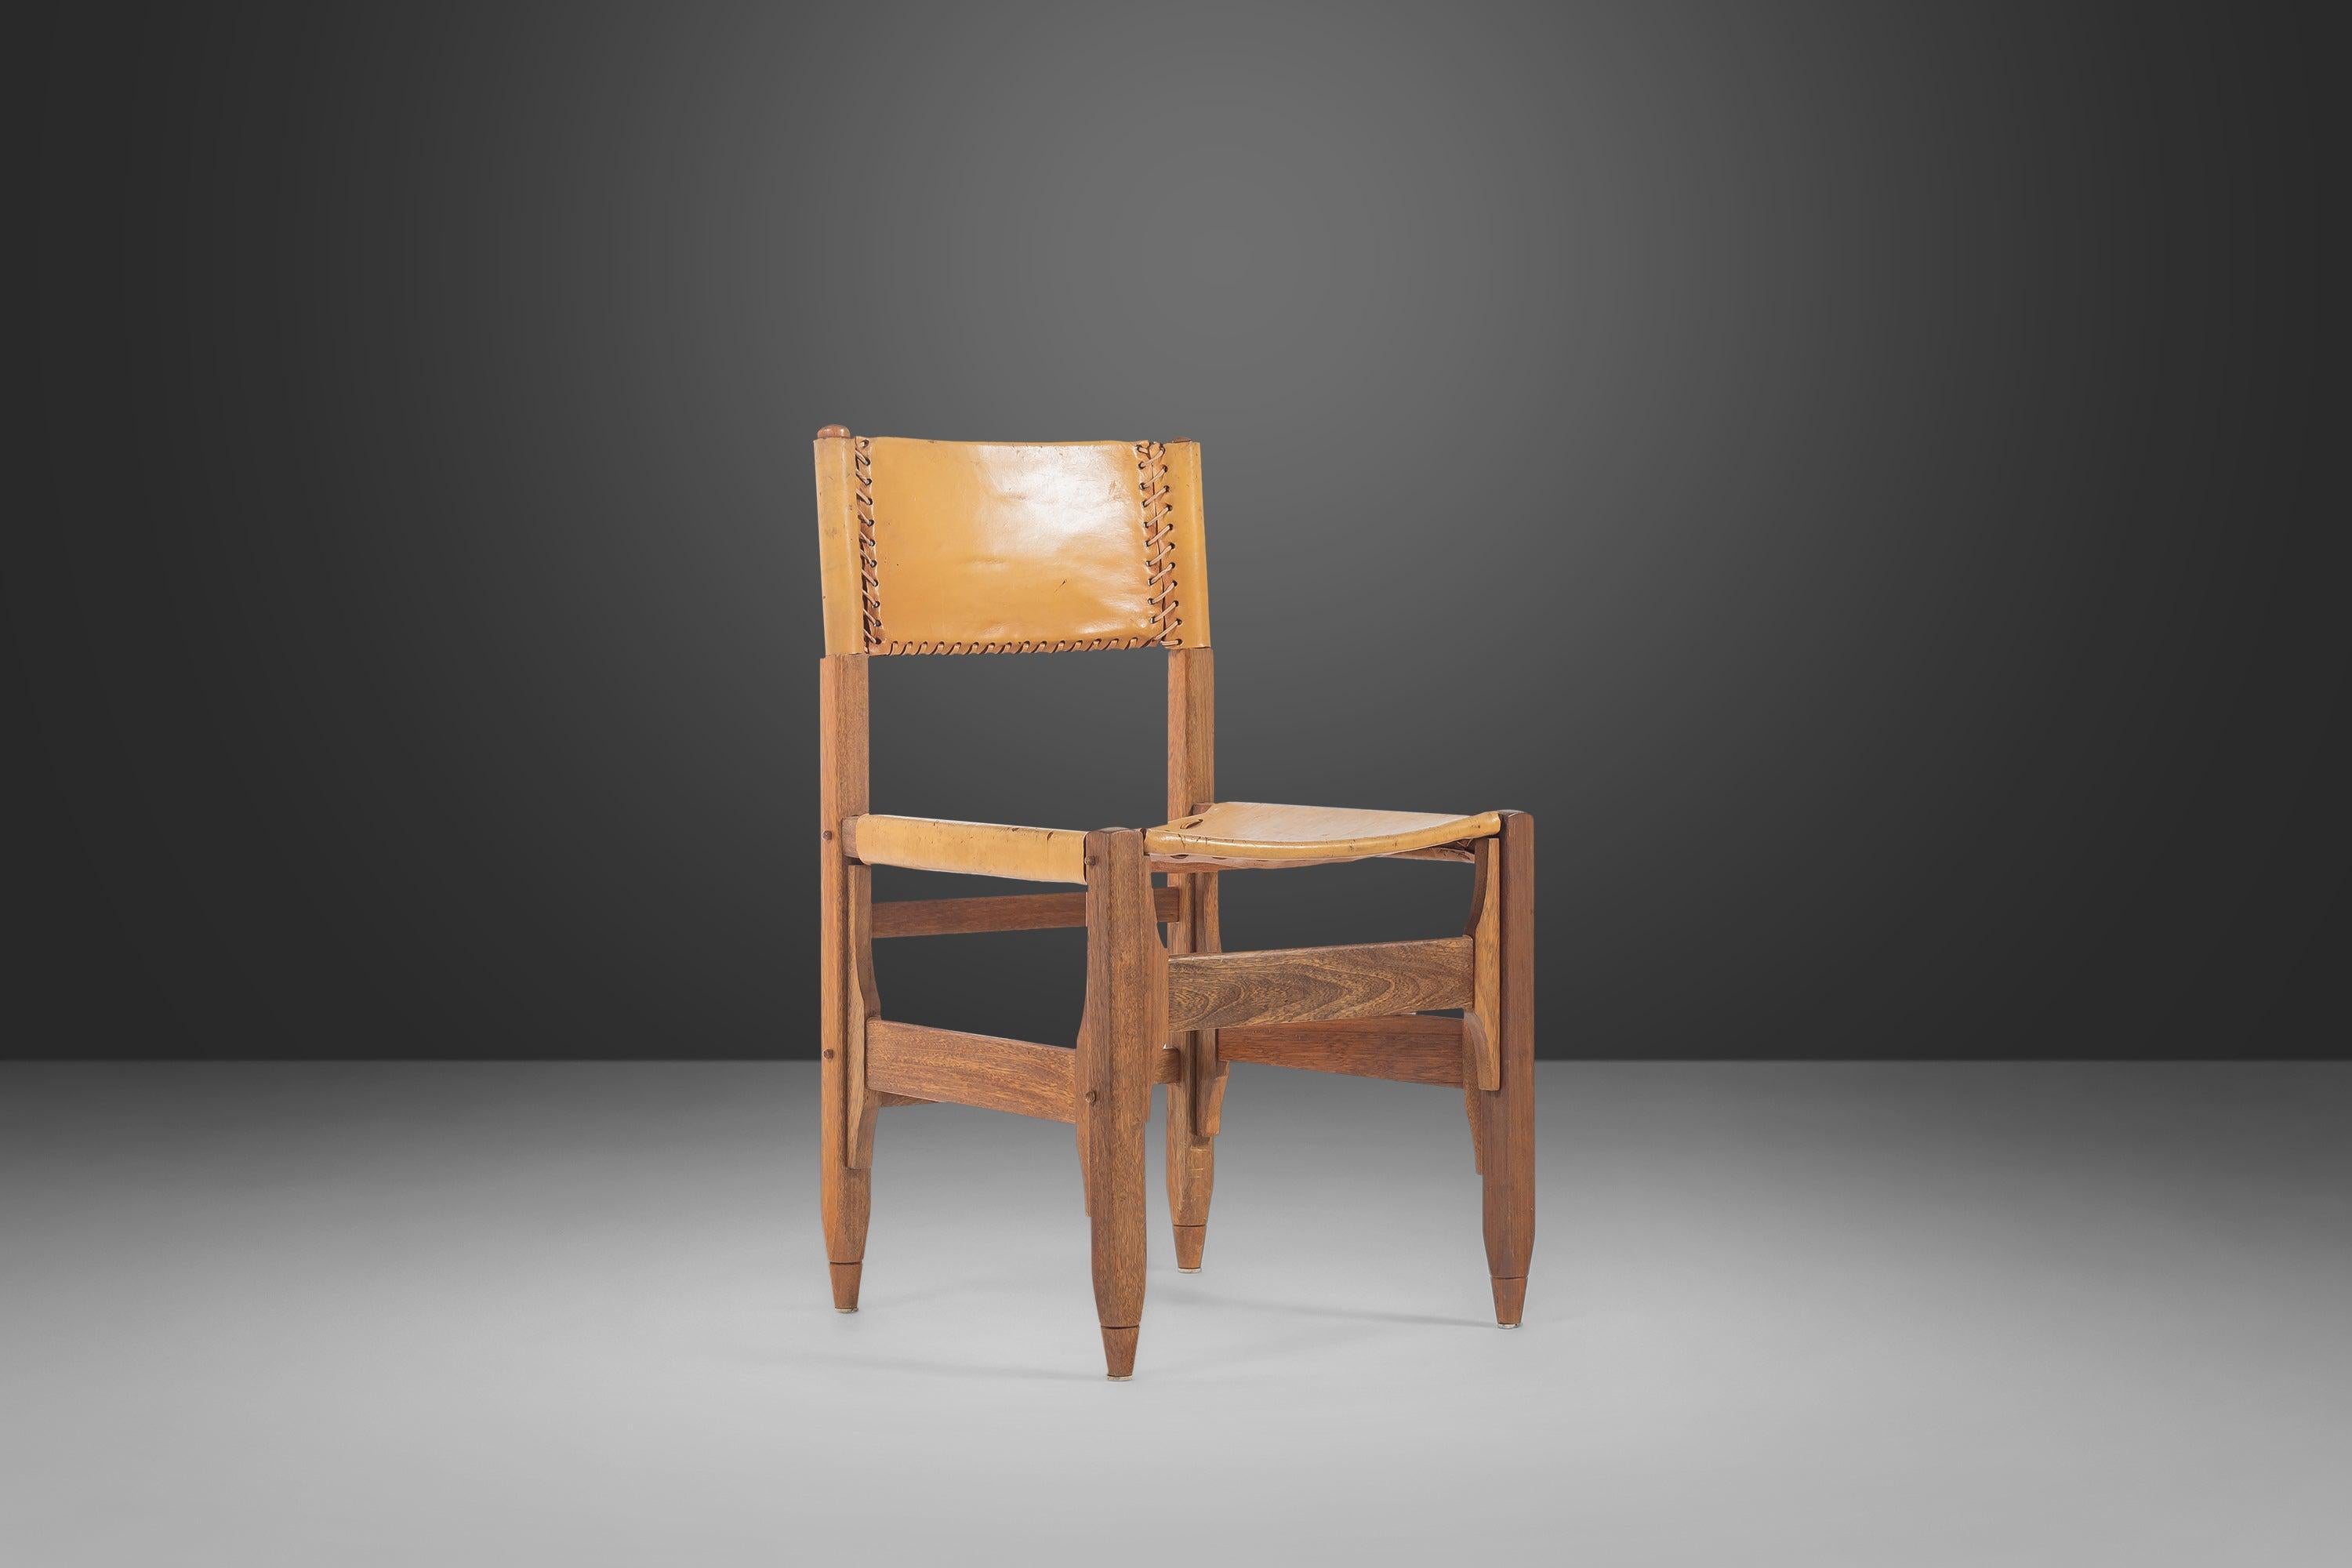 Campaign Tanned Saddle Leather Side Chair Designed by Biermann Werner for Arte Sano, 1960 For Sale